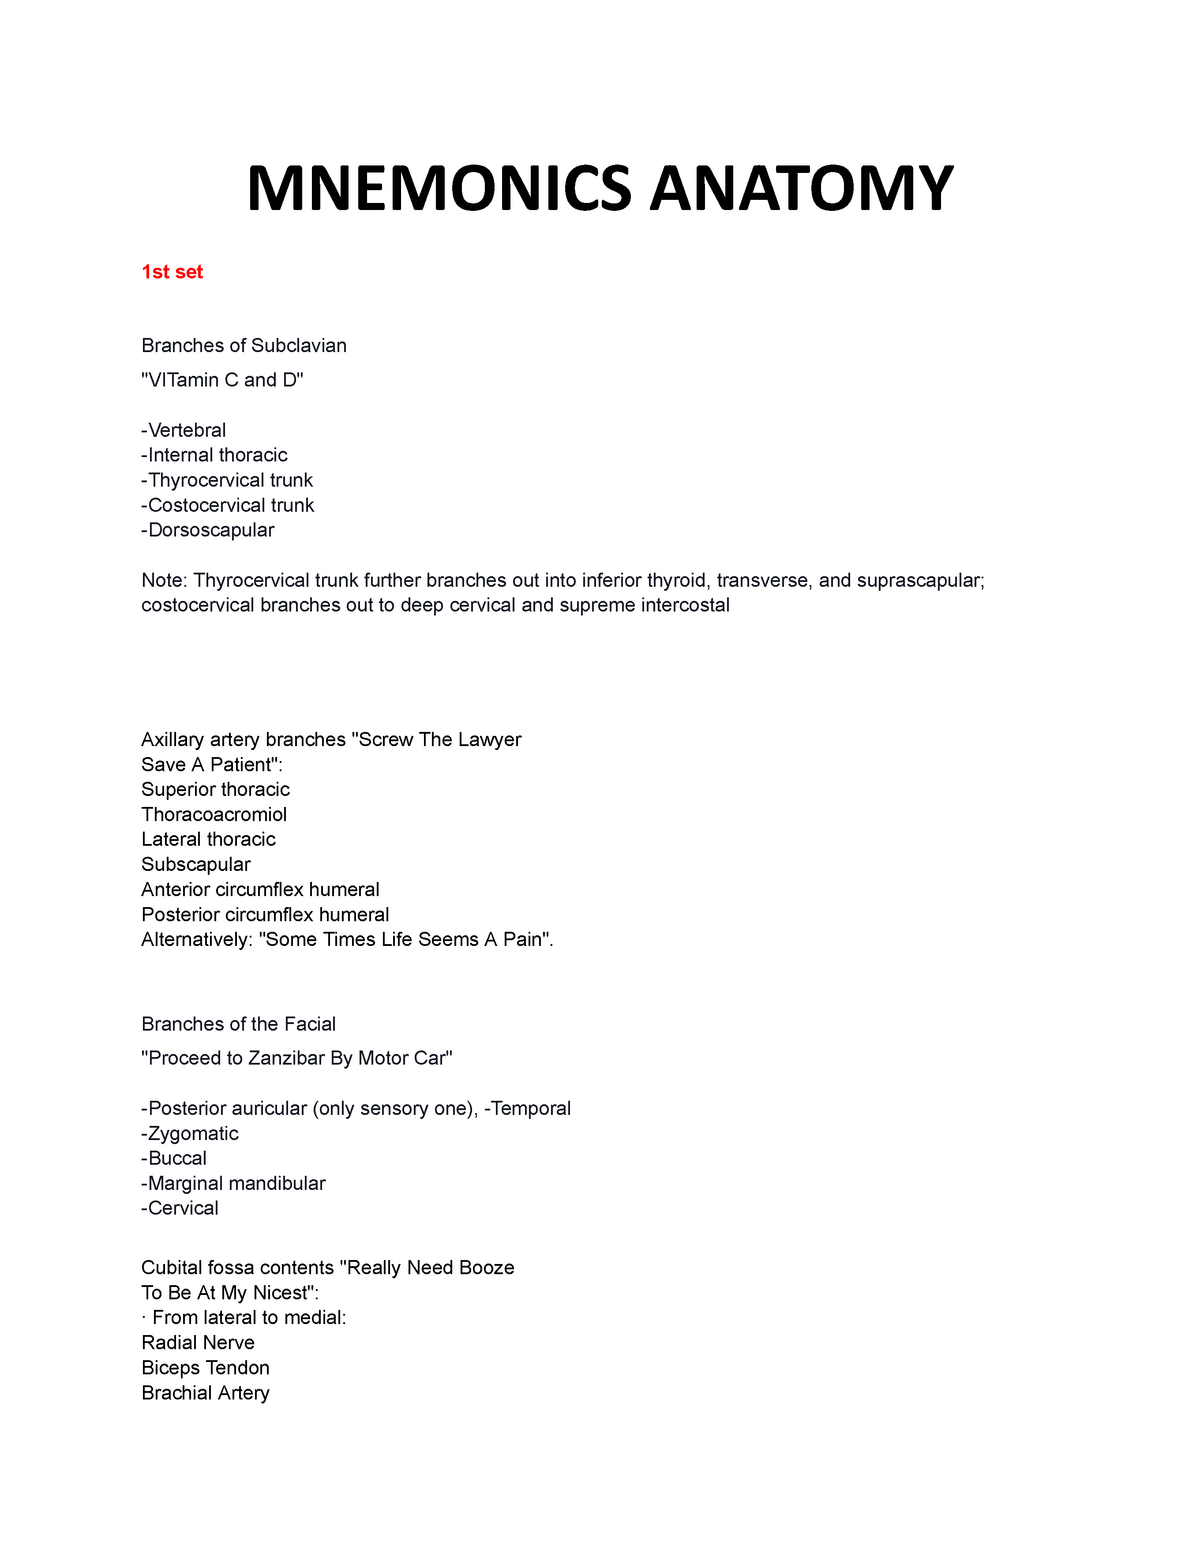 subclavian artery branches mnemonic